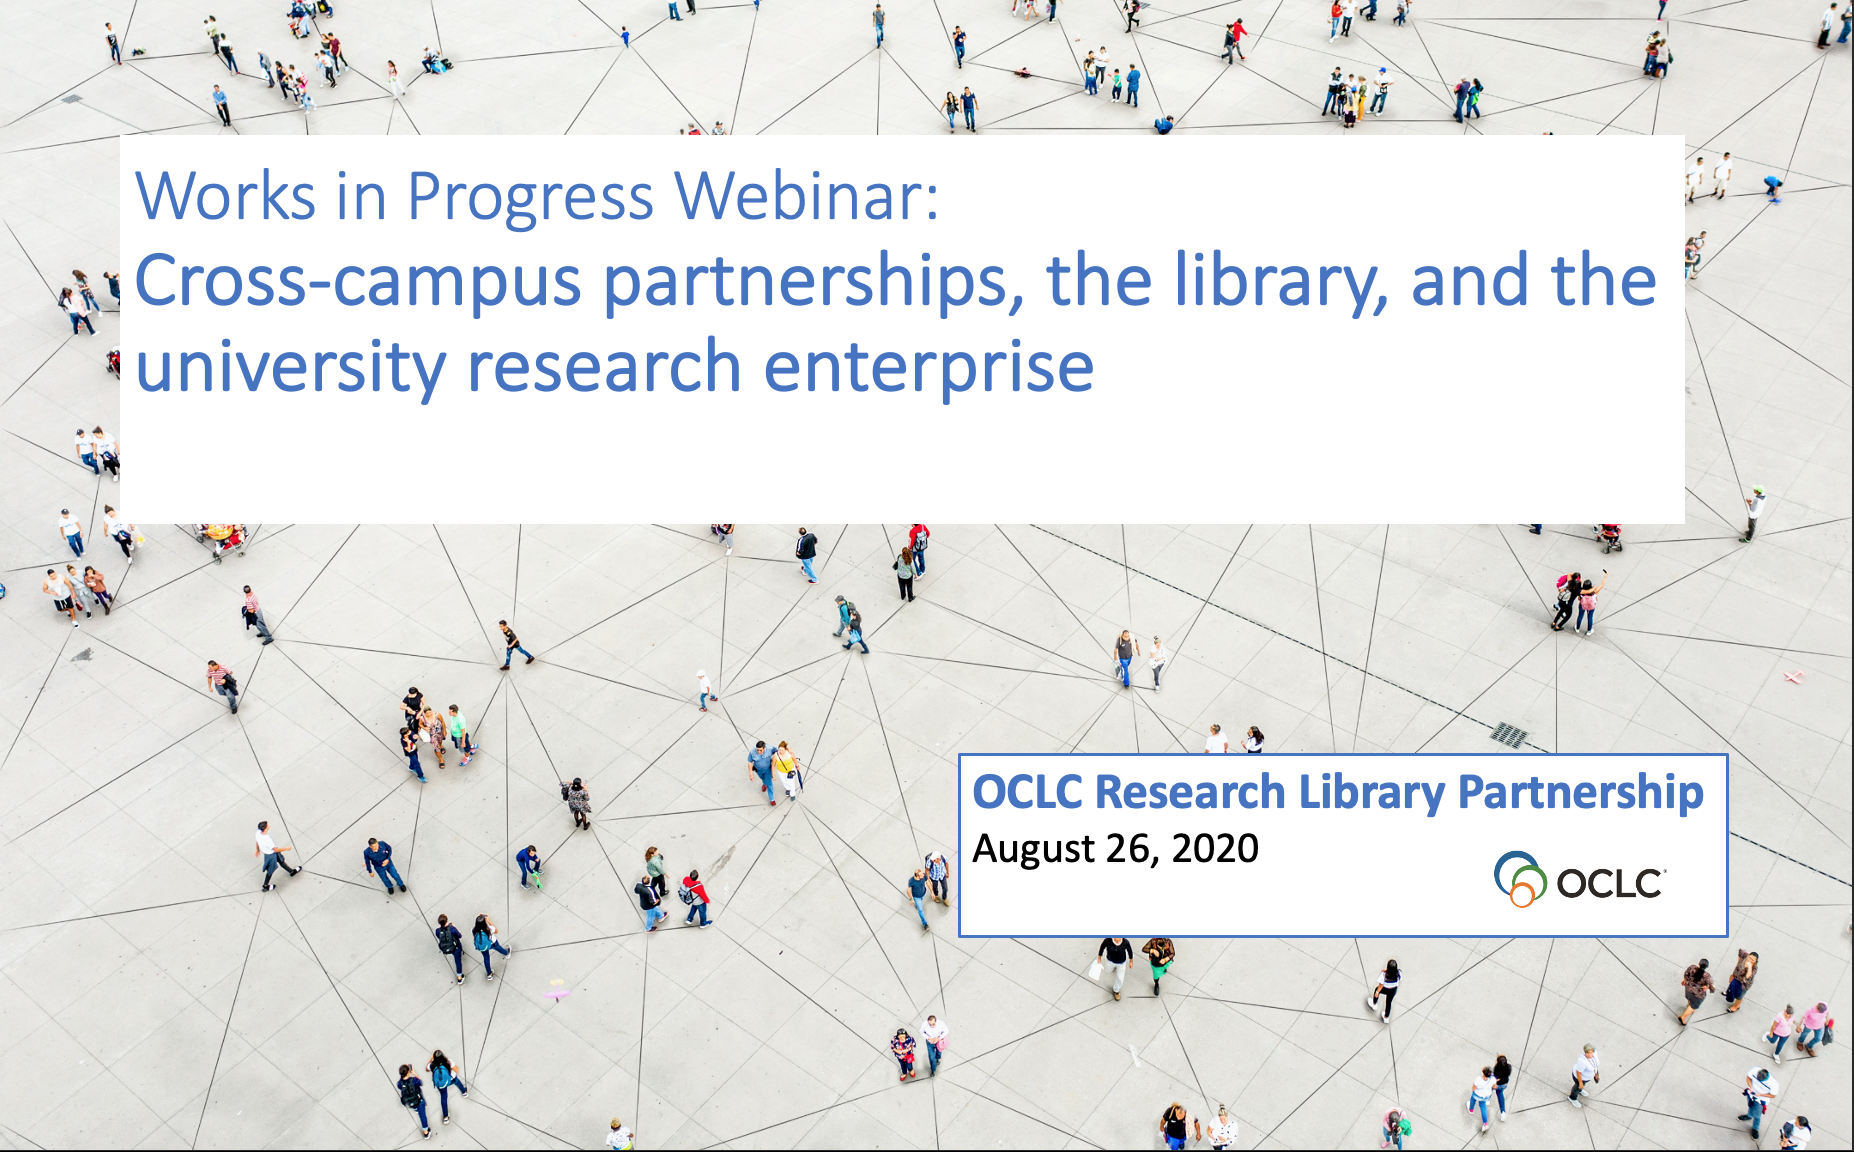 Cross-campus partnerships, the library, and the university research enterprise